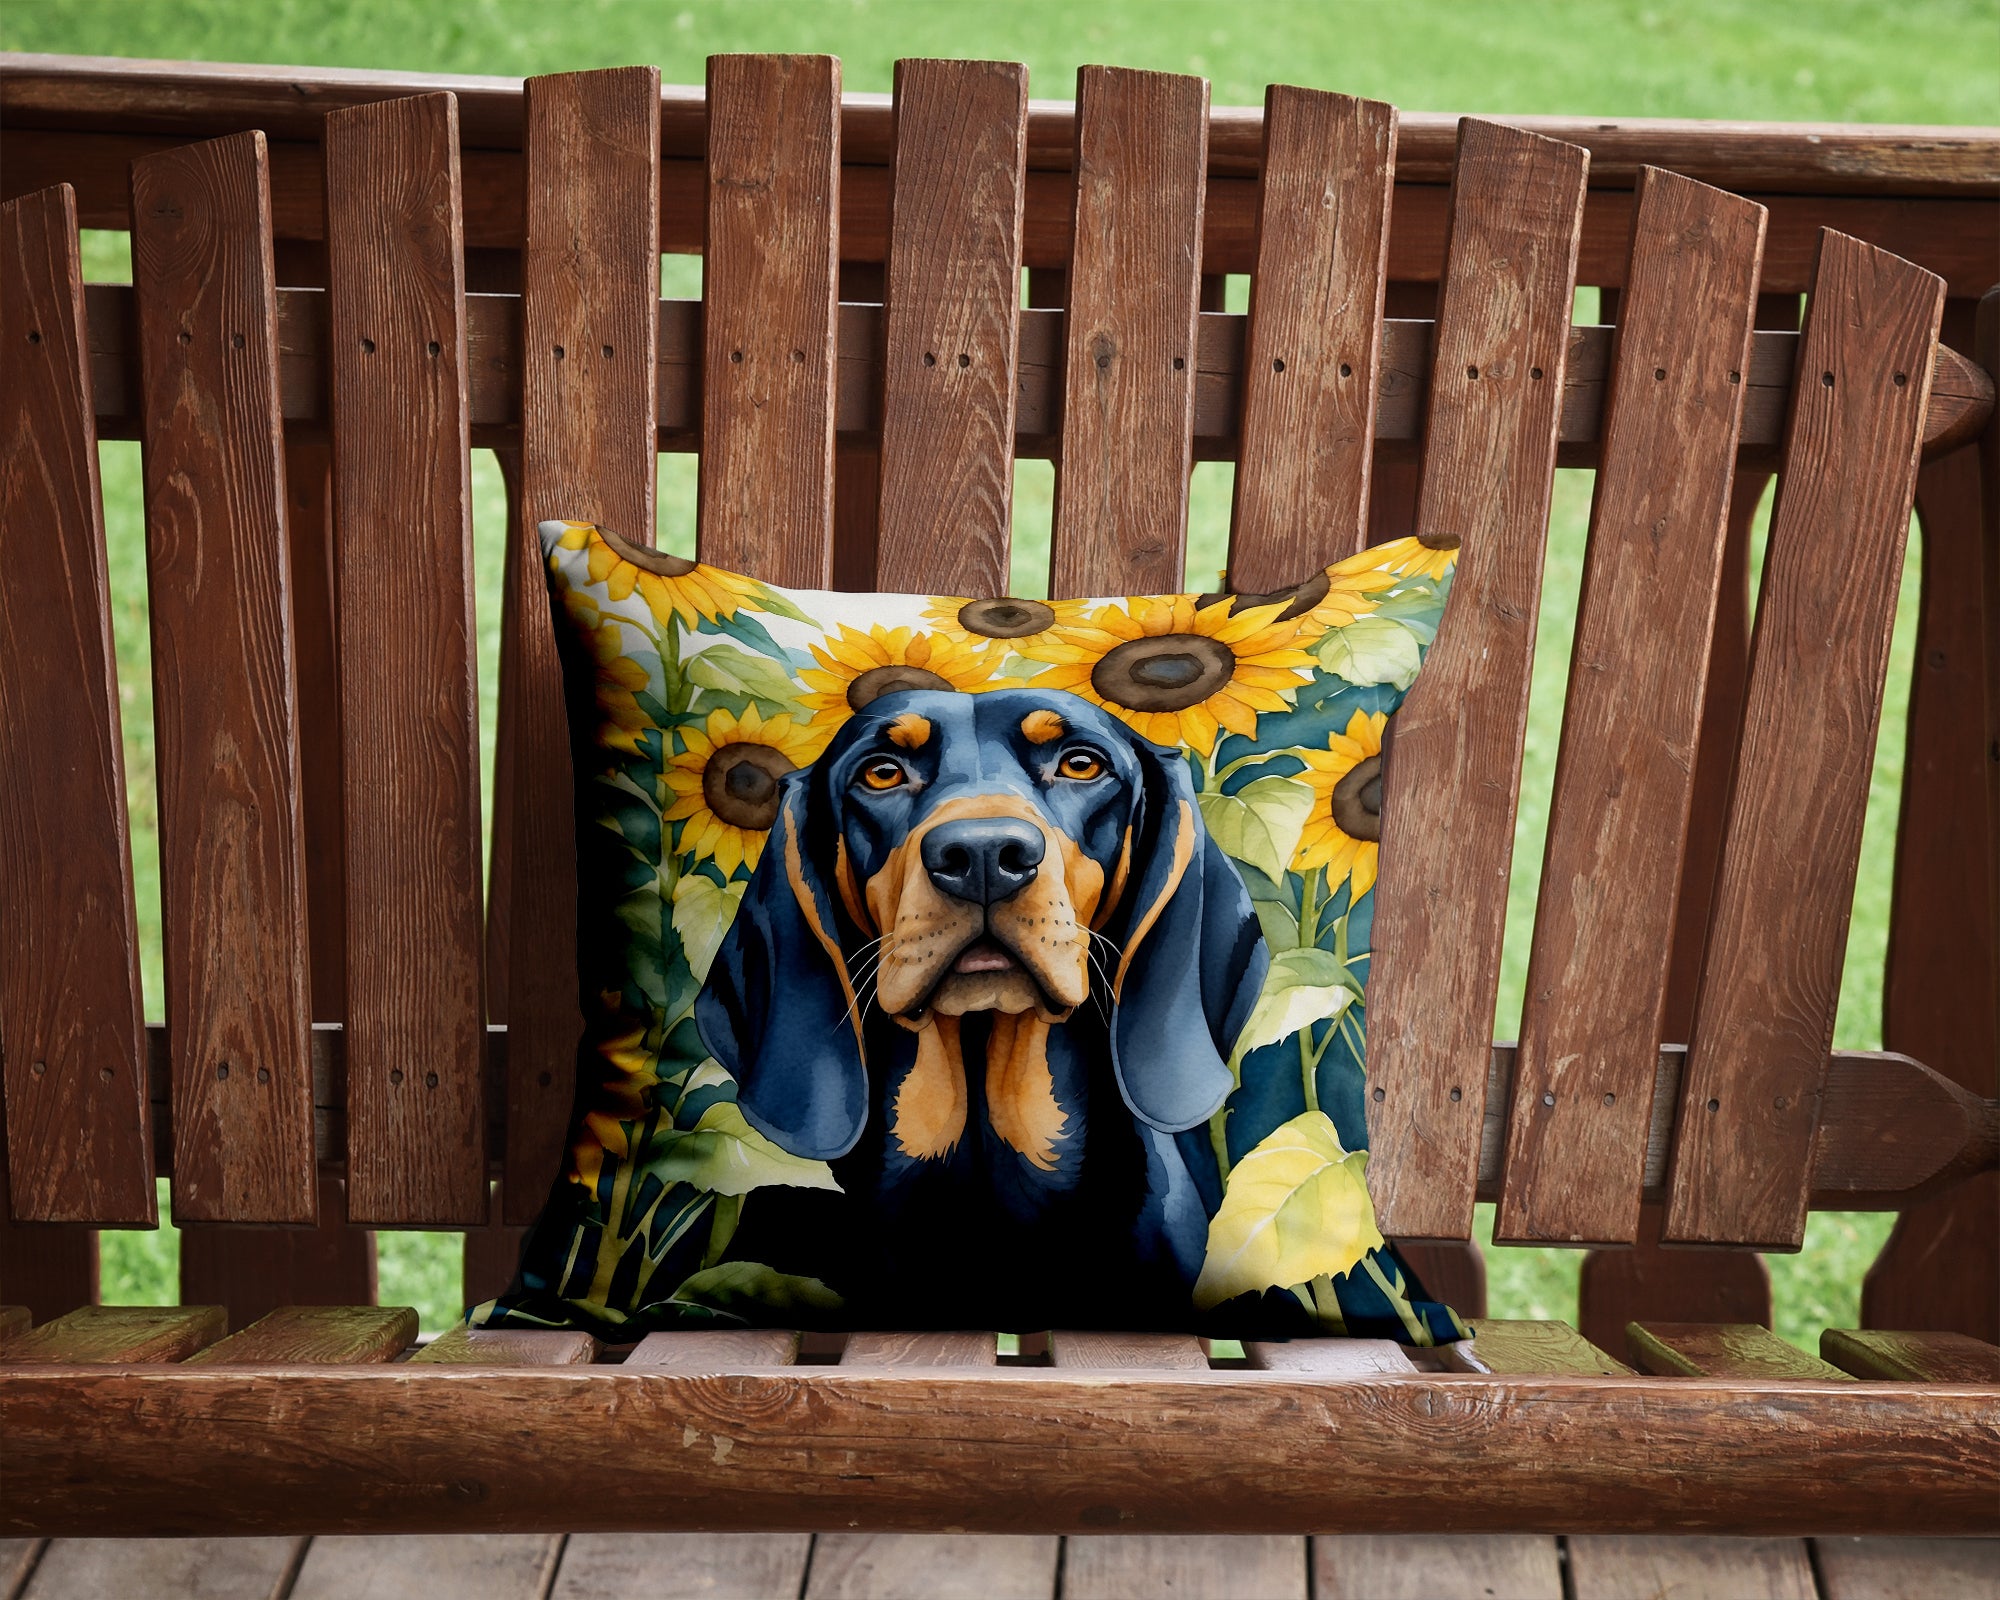 Buy this Black and Tan Coonhound in Sunflowers Throw Pillow